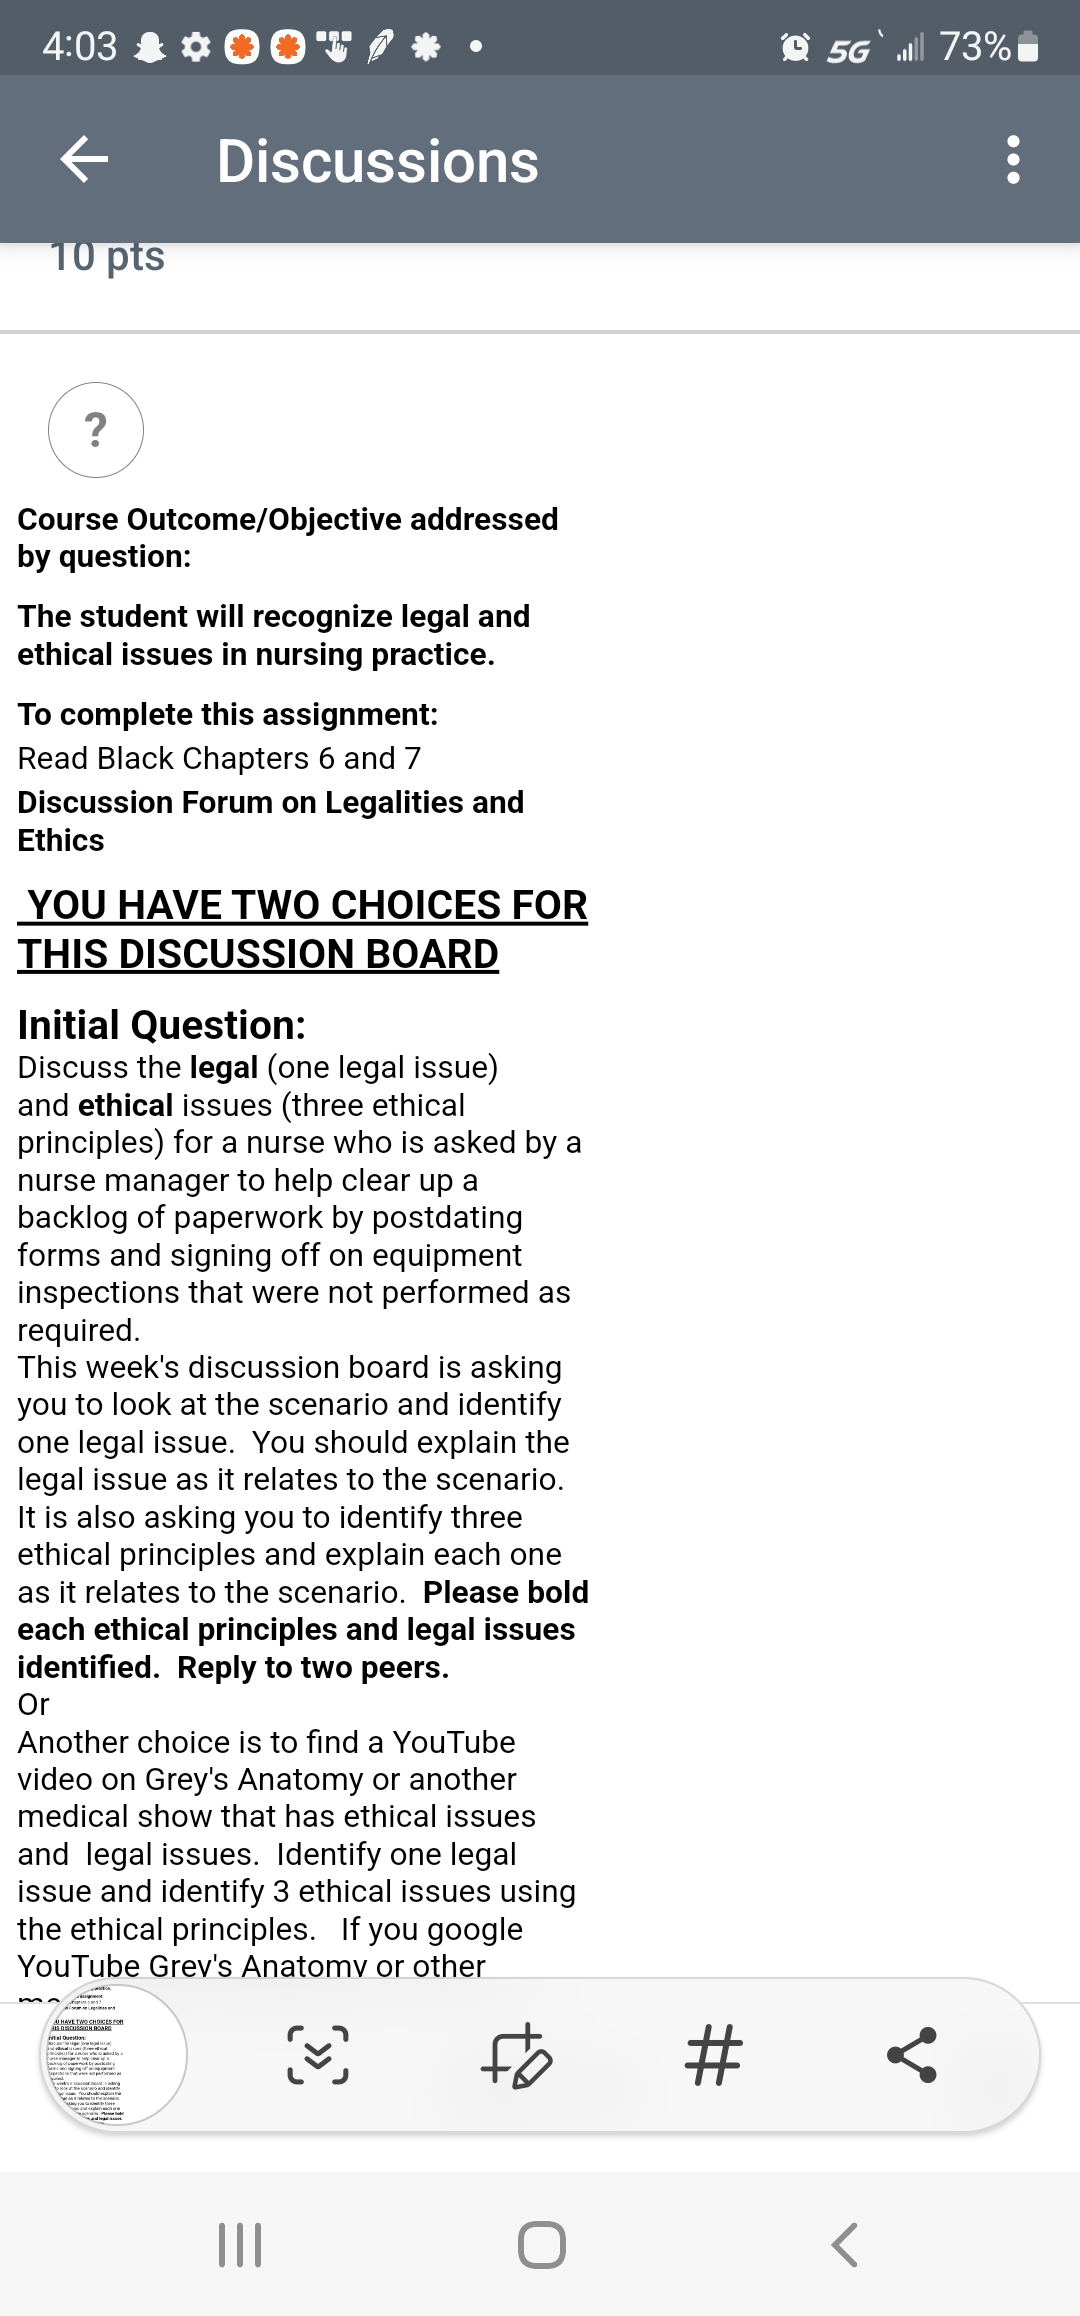 4:03 & ¢0OV,
O 5G` 73%
Discussions
10 pts
?
Course Outcome/Objective addressed
by question:
The student will recognize legal and
ethical issues in nursing practice.
To complete this assignment:
Read Black Chapters 6 and 7
Discussion Forum on Legalities and
Ethics
YOU HAVE TWO CHOICES FOR
THIS DISCUSSION BOARD
Initial Question:
Discuss the legal (one legal issue)
and ethical issues (three ethical
principles) for a nurse who is asked by a
nurse manager to help clear up a
backlog of paperwork by postdating
forms and signing off on equipment
inspections that were not performed as
required.
This week's discussion board is asking
you to look at the scenario and identify
one legal issue. You should explain the
legal issue as it relates to the scenario.
It is also asking you to identify three
ethical principles and explain each one
as it relates to the scenario. Please bold
each ethical principles and legal issues
identified. Reply to two peers.
Or
Another choice is to find a YouTube
video on Grey's Anatomy or another
medical show that has ethical issues
and legal issues. Identify one legal
issue and identify 3 ethical issues using
the ethical principles. If you google
YouTube Grev's Anatomv or other
AHAVE TWOCHOCES Fon
tal Outin
%23
